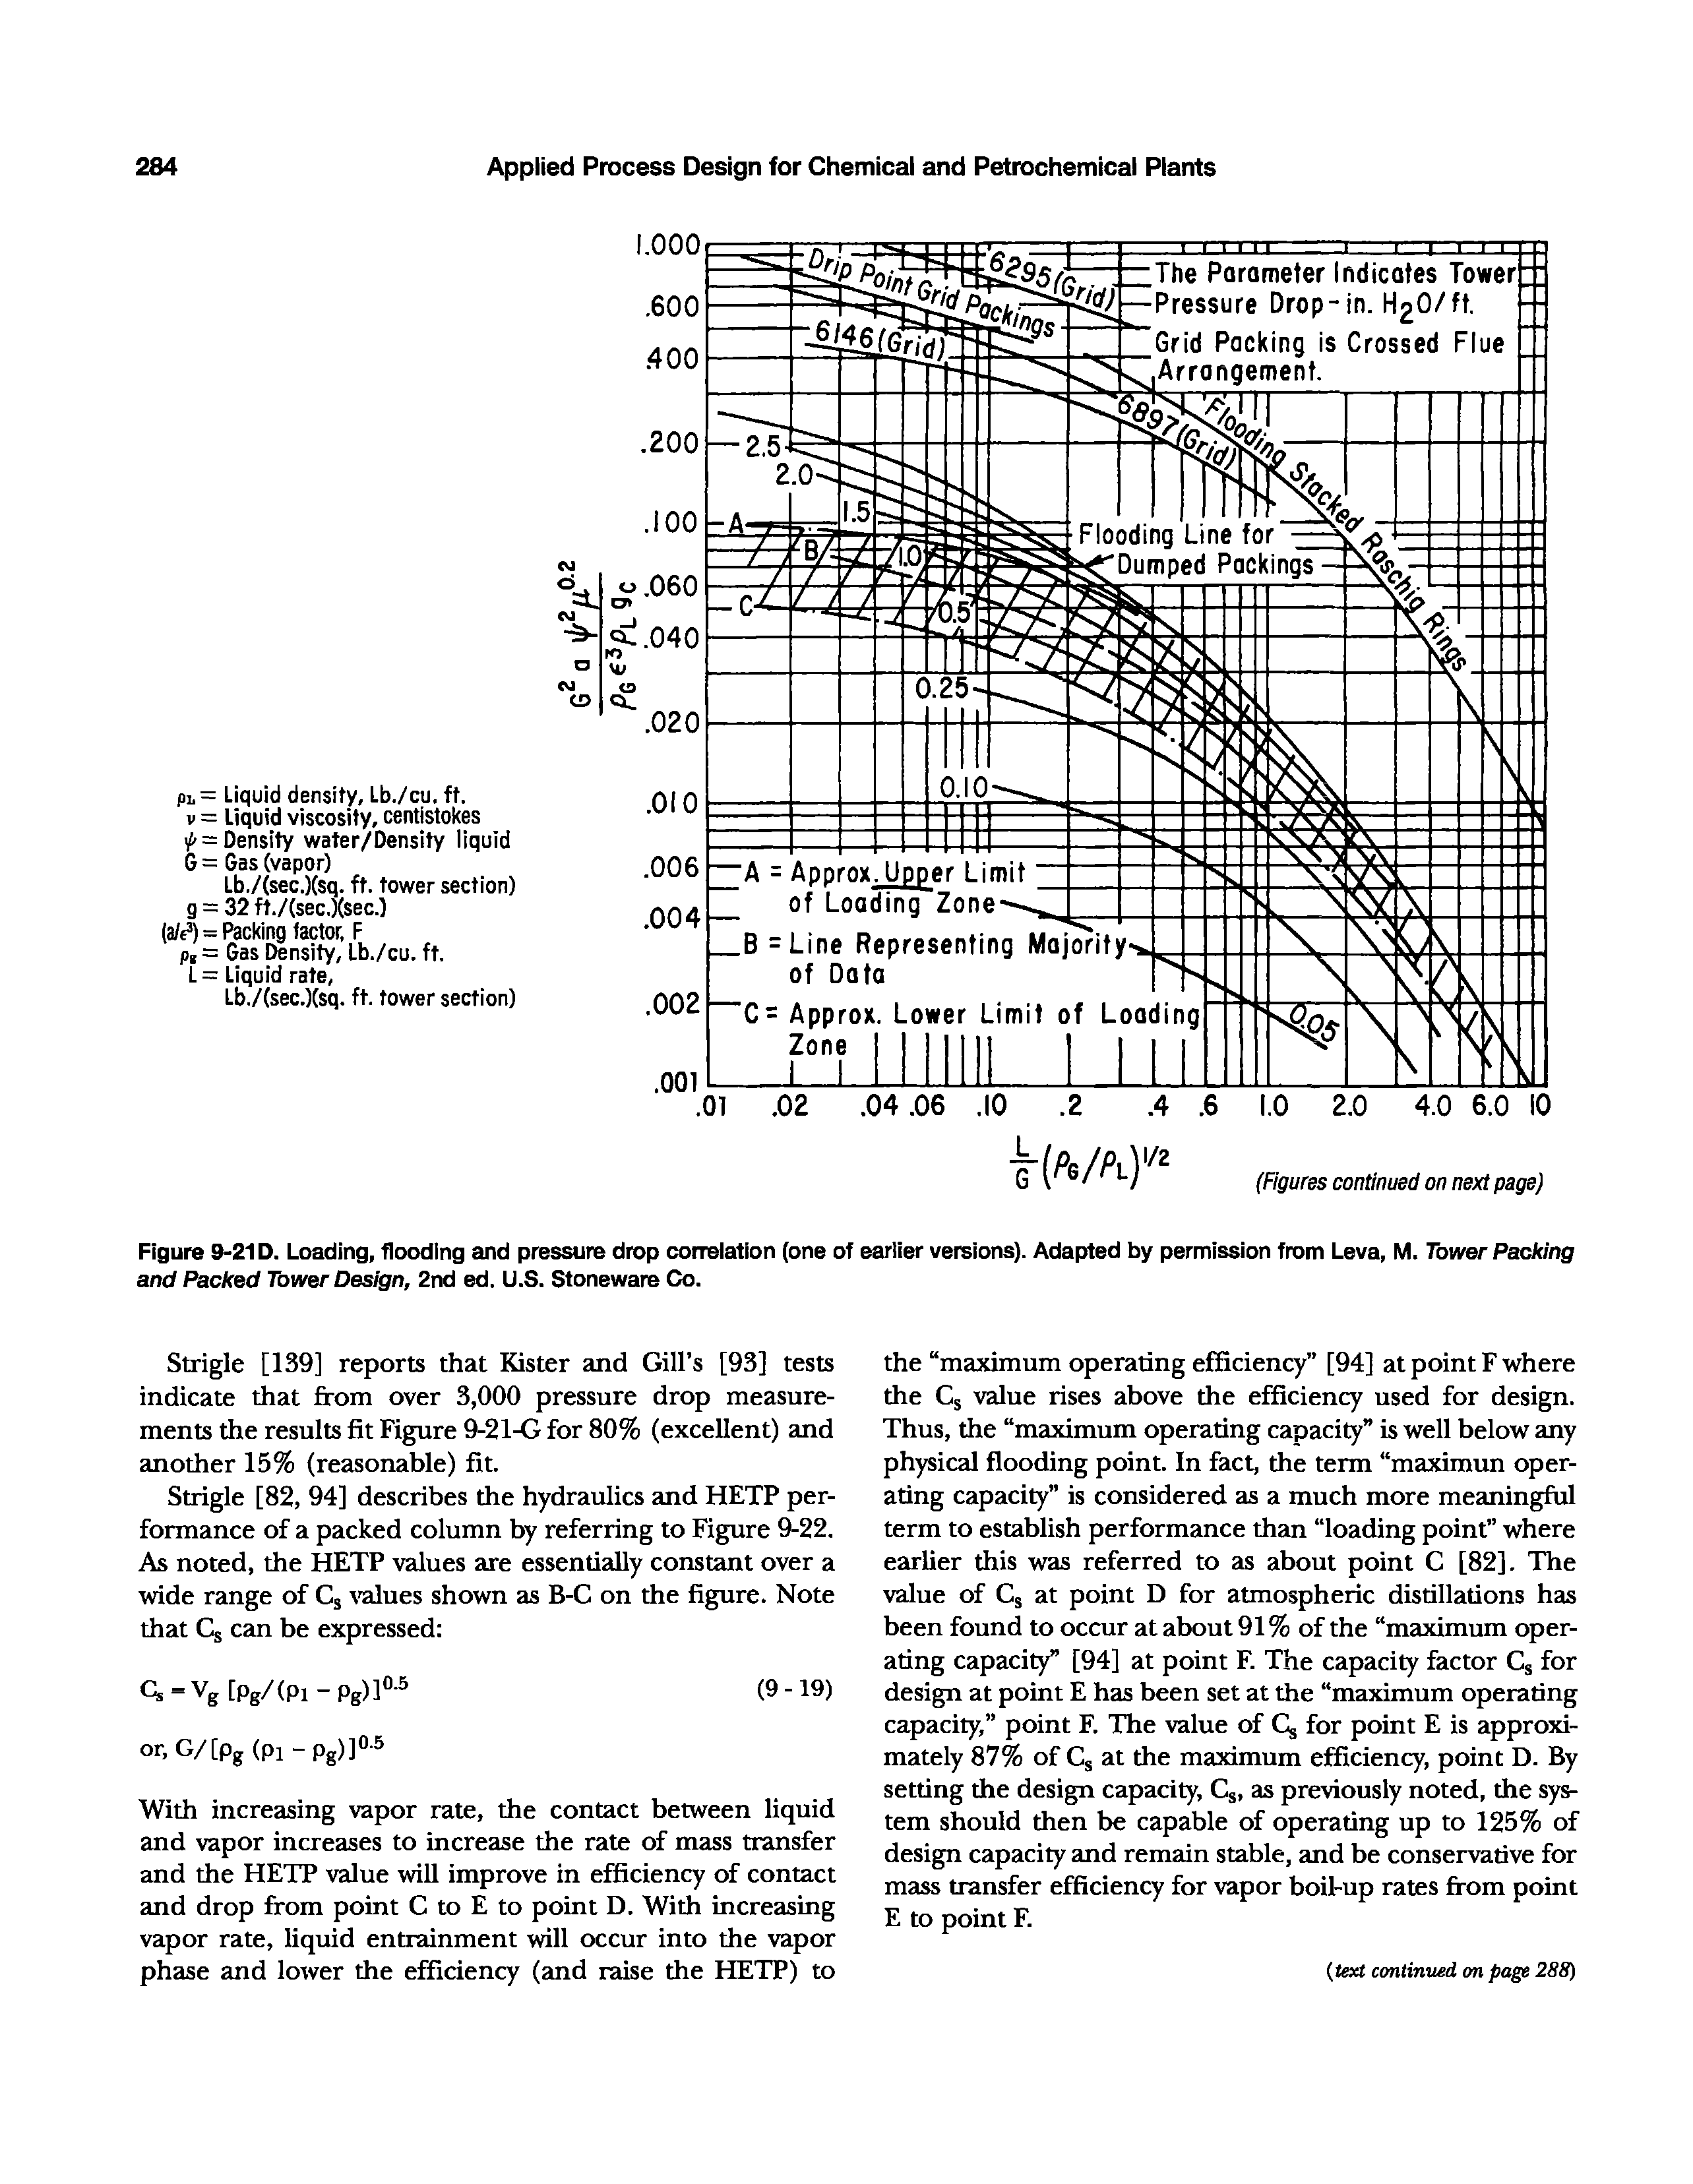 Figure 9-21D. Loading, flooding and pressure drop coireiation (one of earlier versions). Adapted by permission from Leva, M. Tower Packing and Packed Tower Design, 2nd ed. U.S. Stoneware Co.